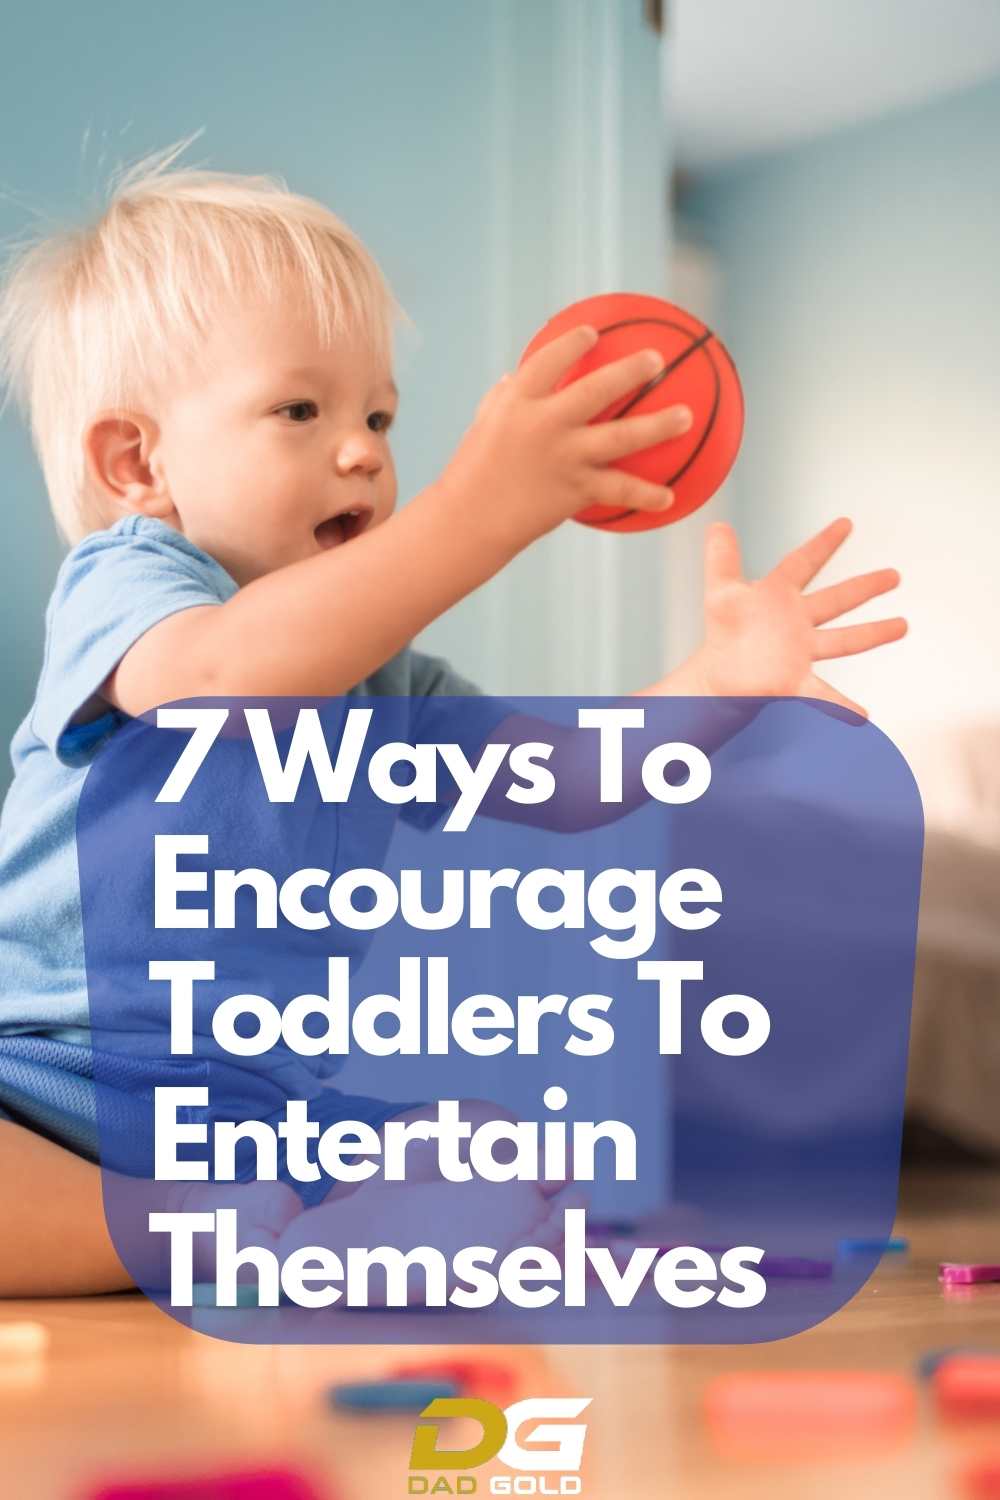 7 Ways To Encourage Toddlers To Entertain Themselves